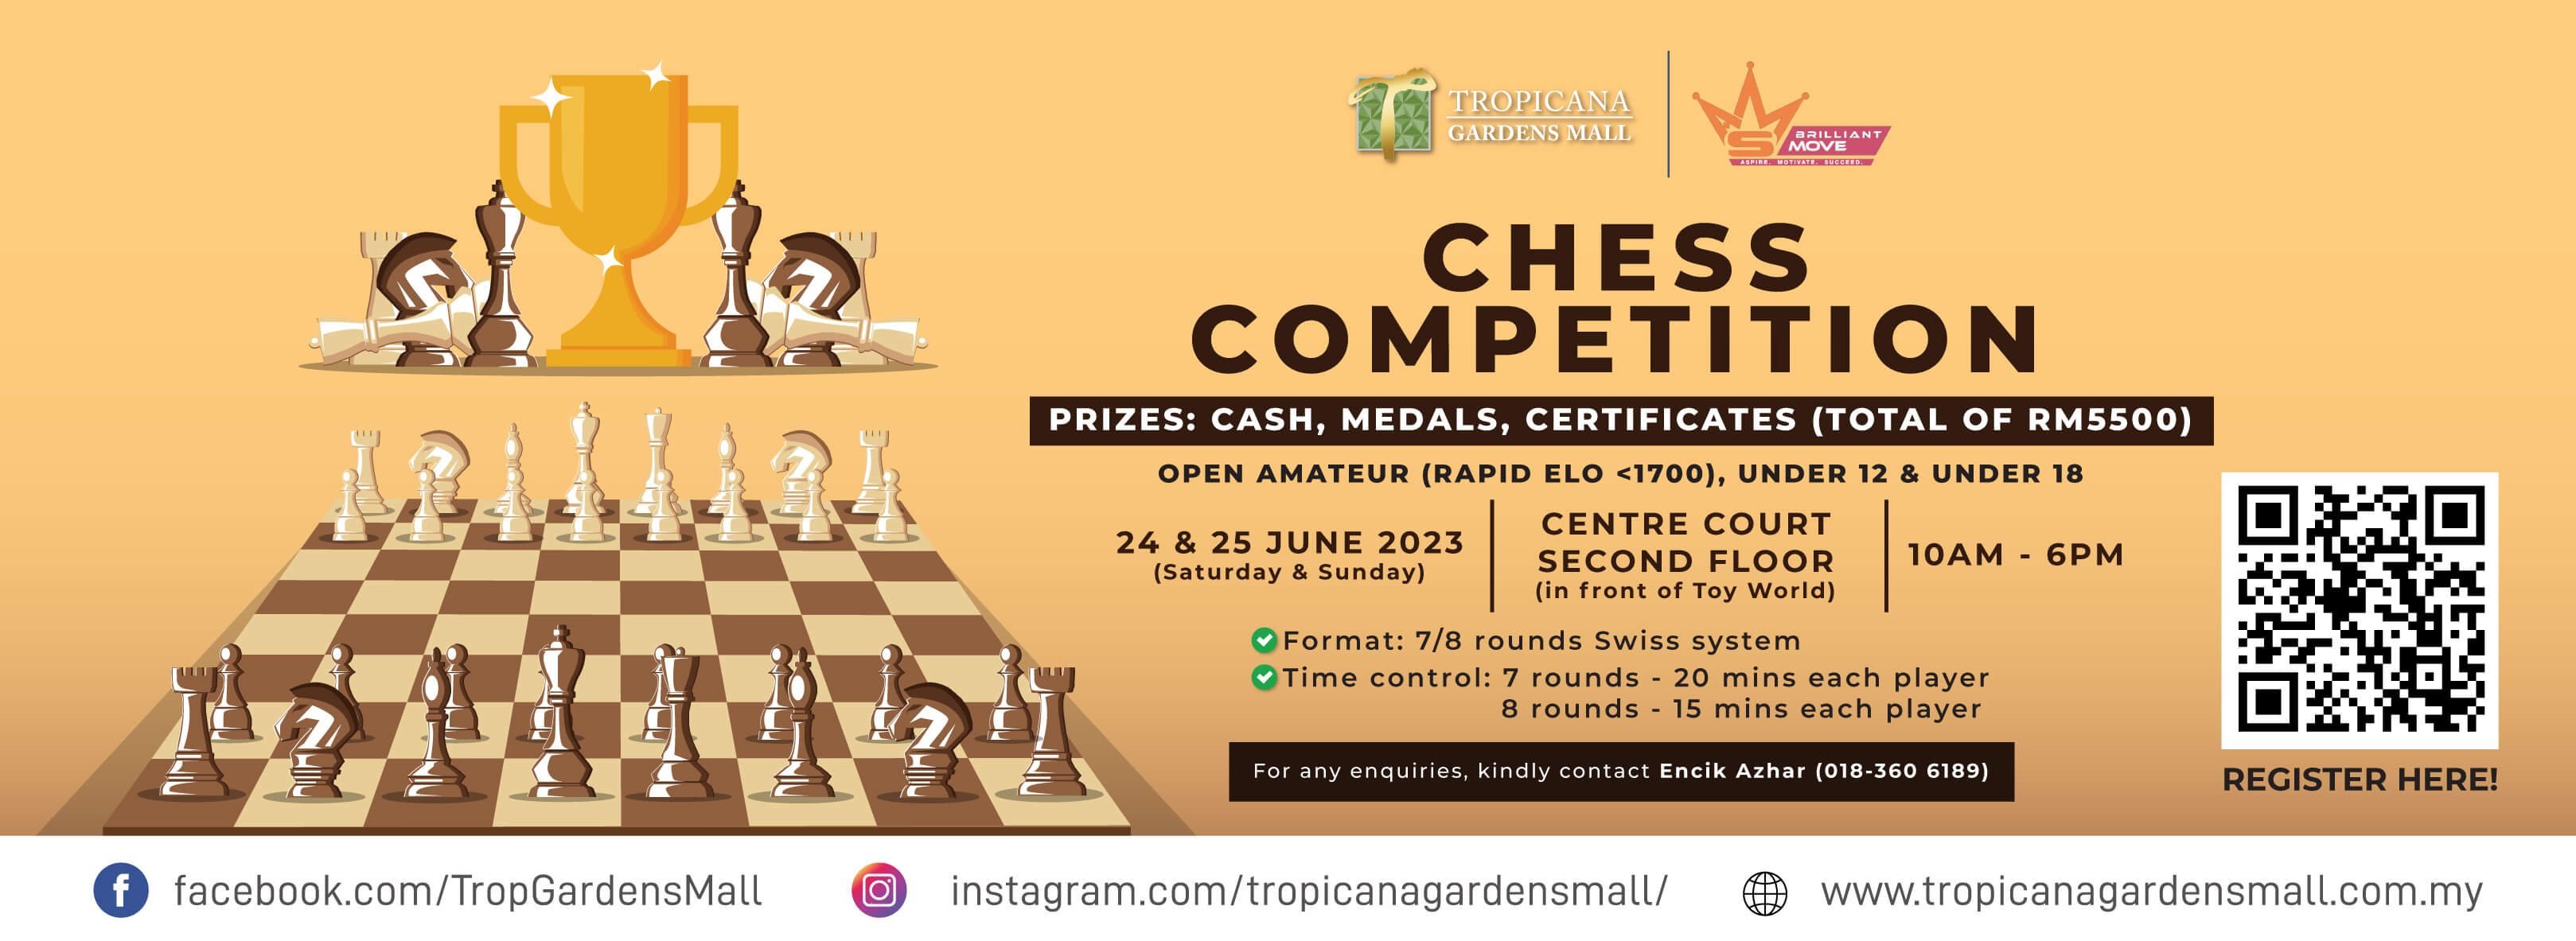 Tropicana Gardens Mall Chess Competition